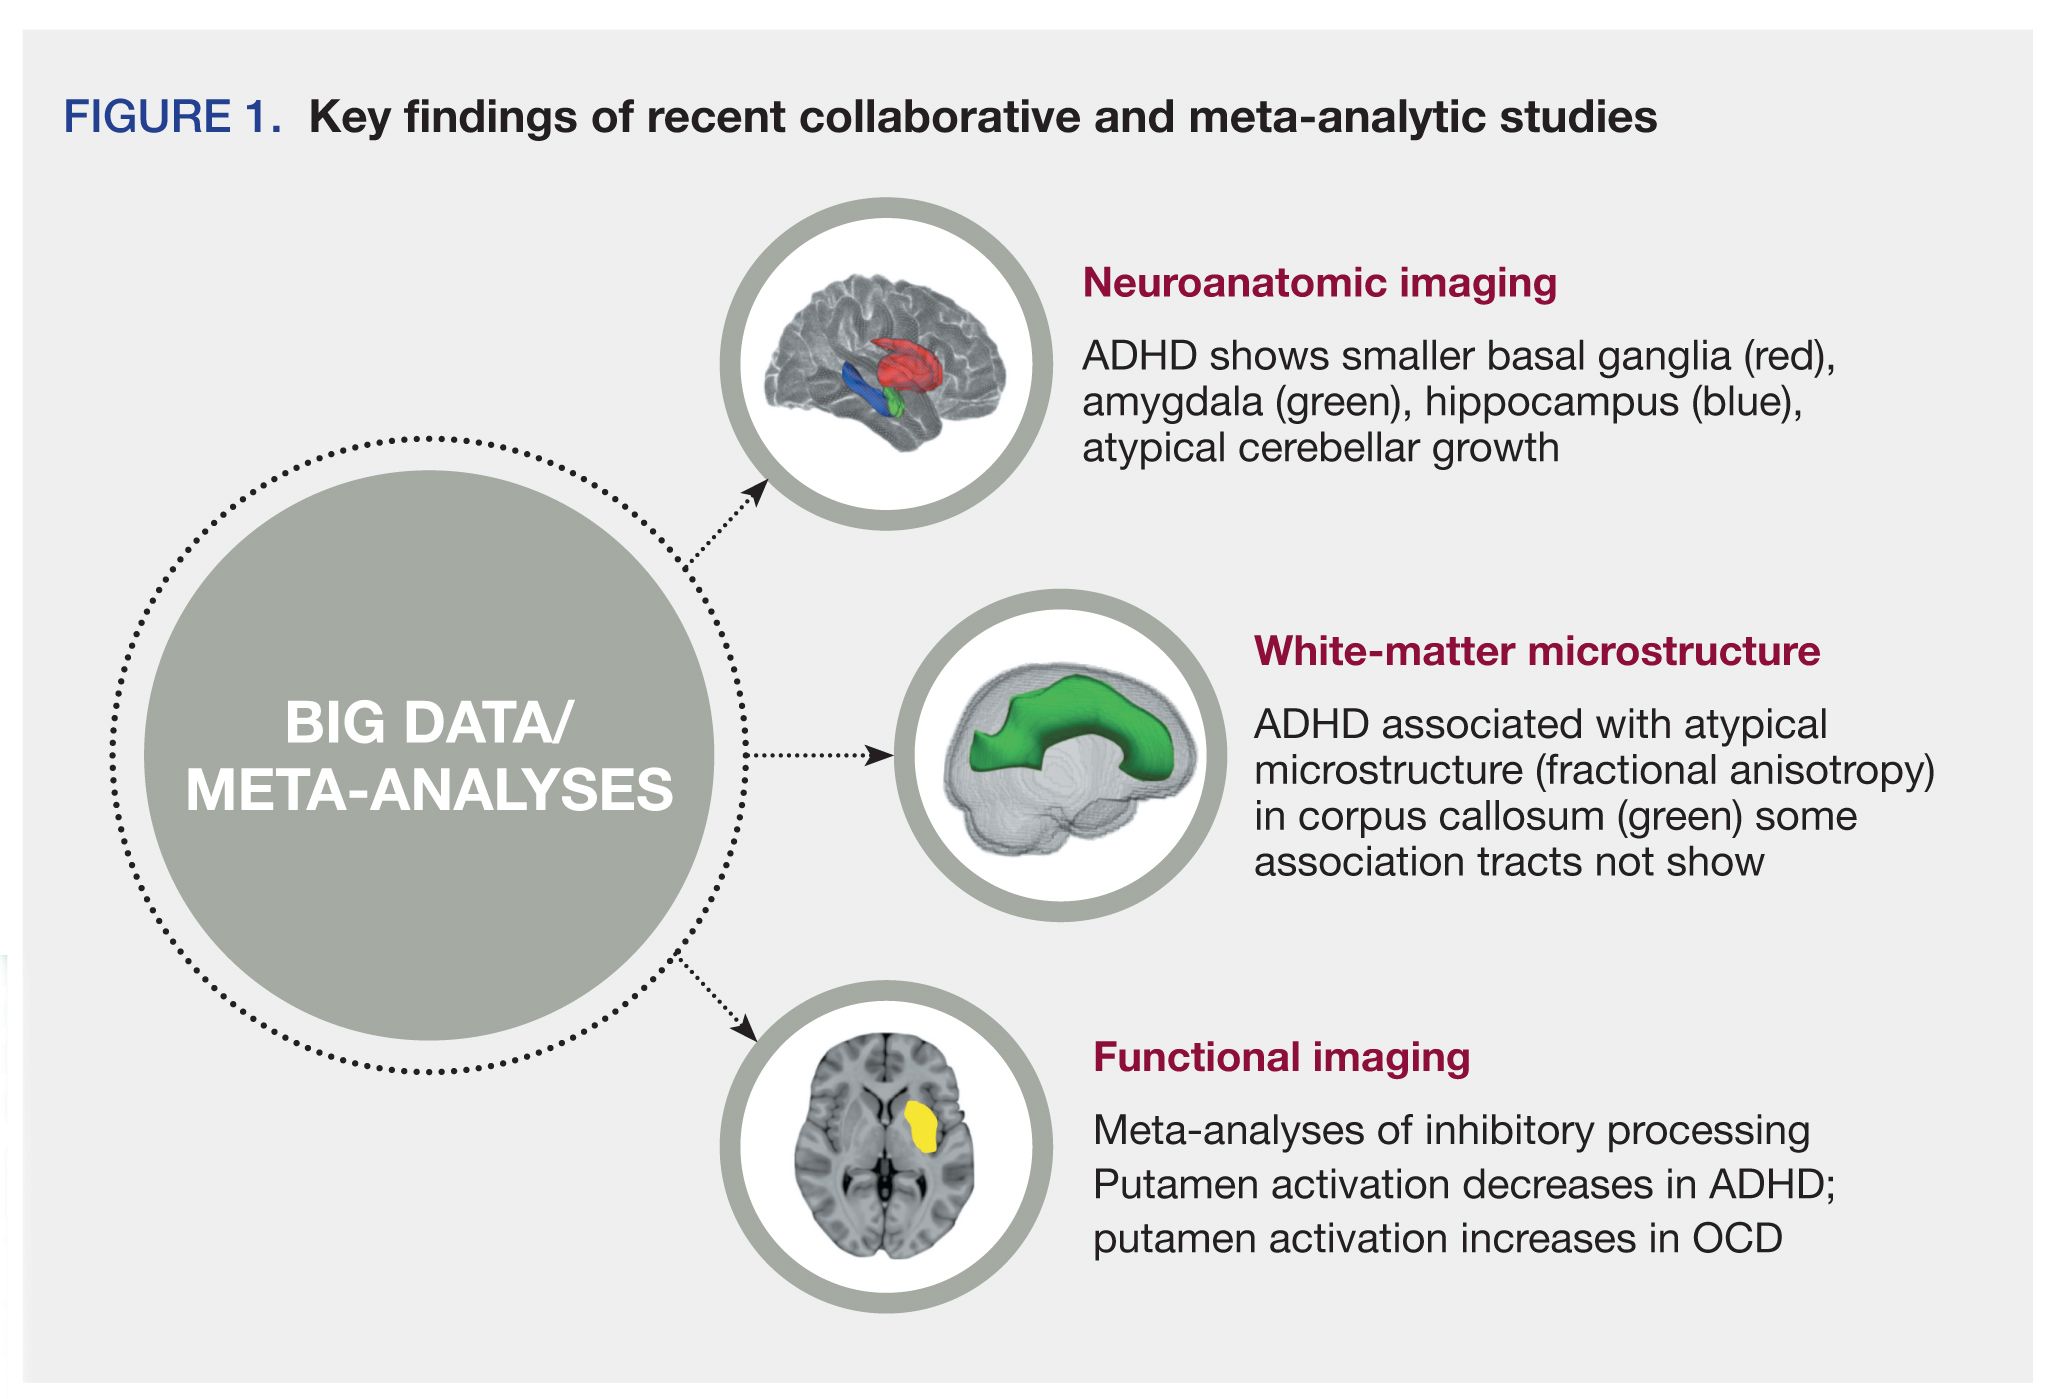 Key findings of recent collaborative and meta-analytic studies